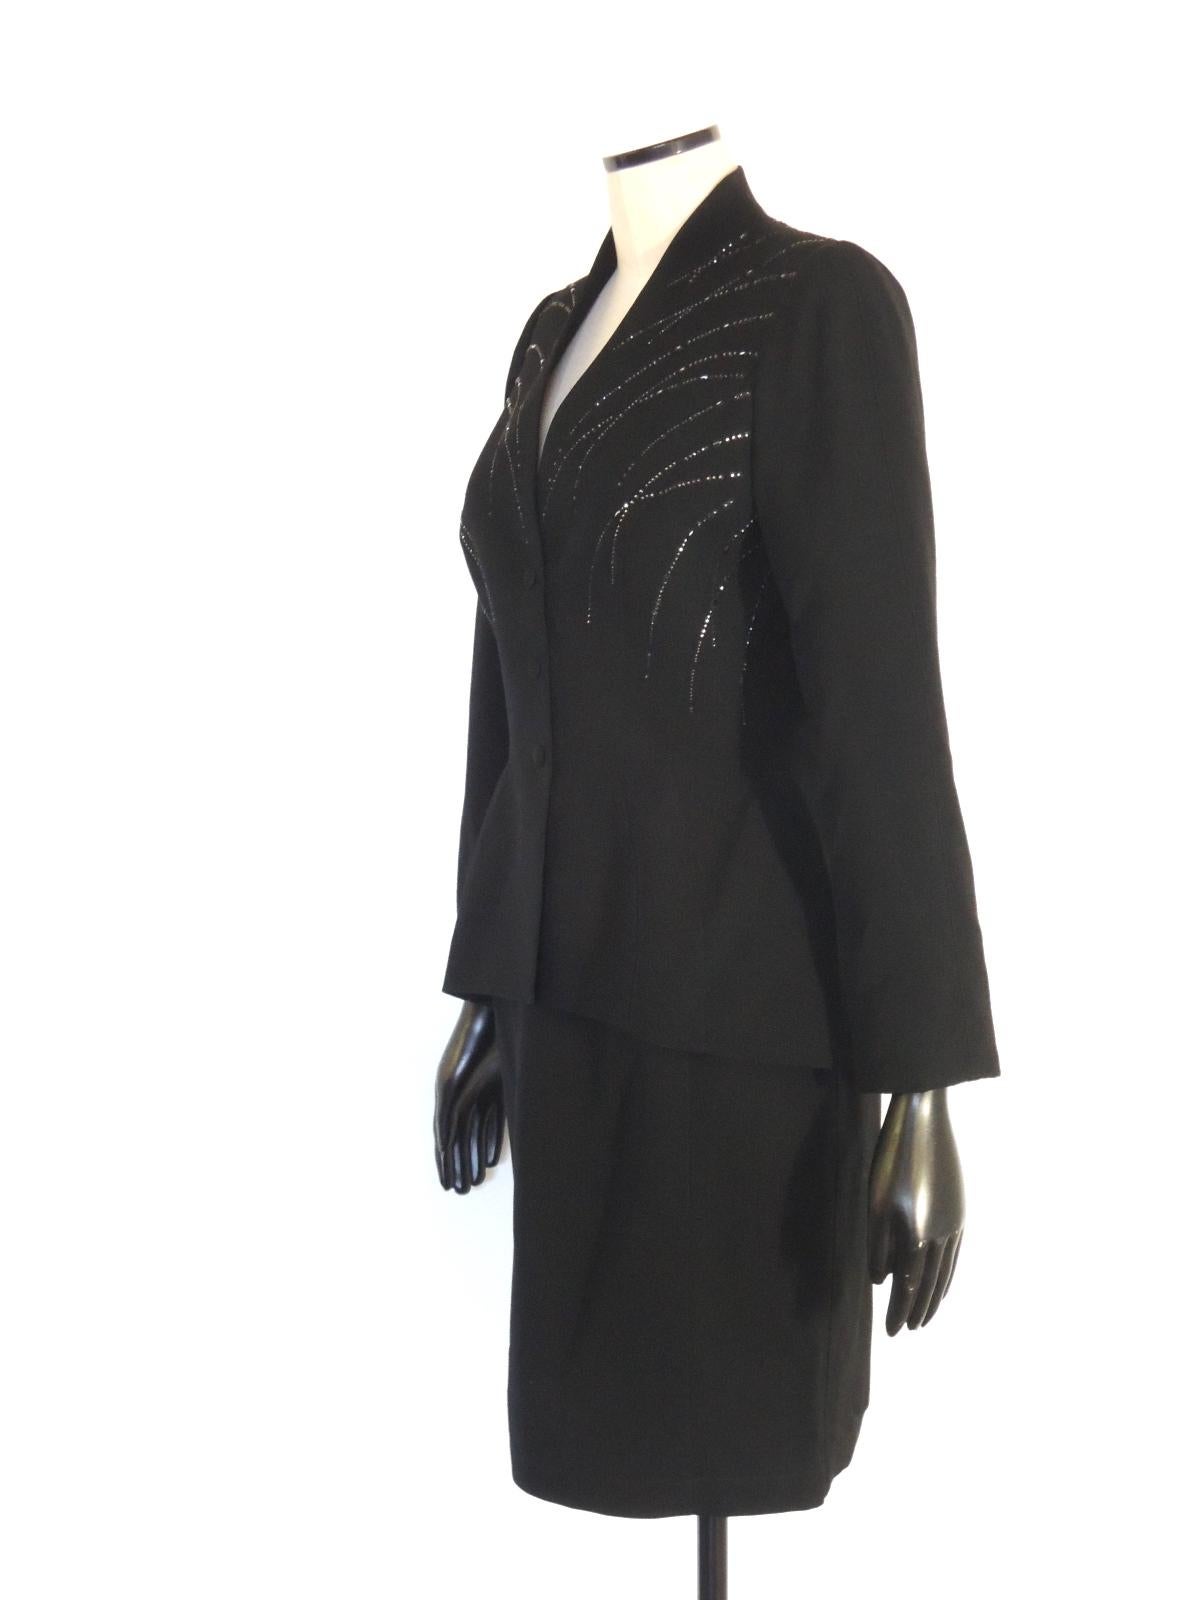 Vintage Thierry Mugler black wool 2-piece skirt suit with reflective embellishments on the jacket. 3-snap front closure on the jacket, back zipper and hook closure on the skirt. I note a 